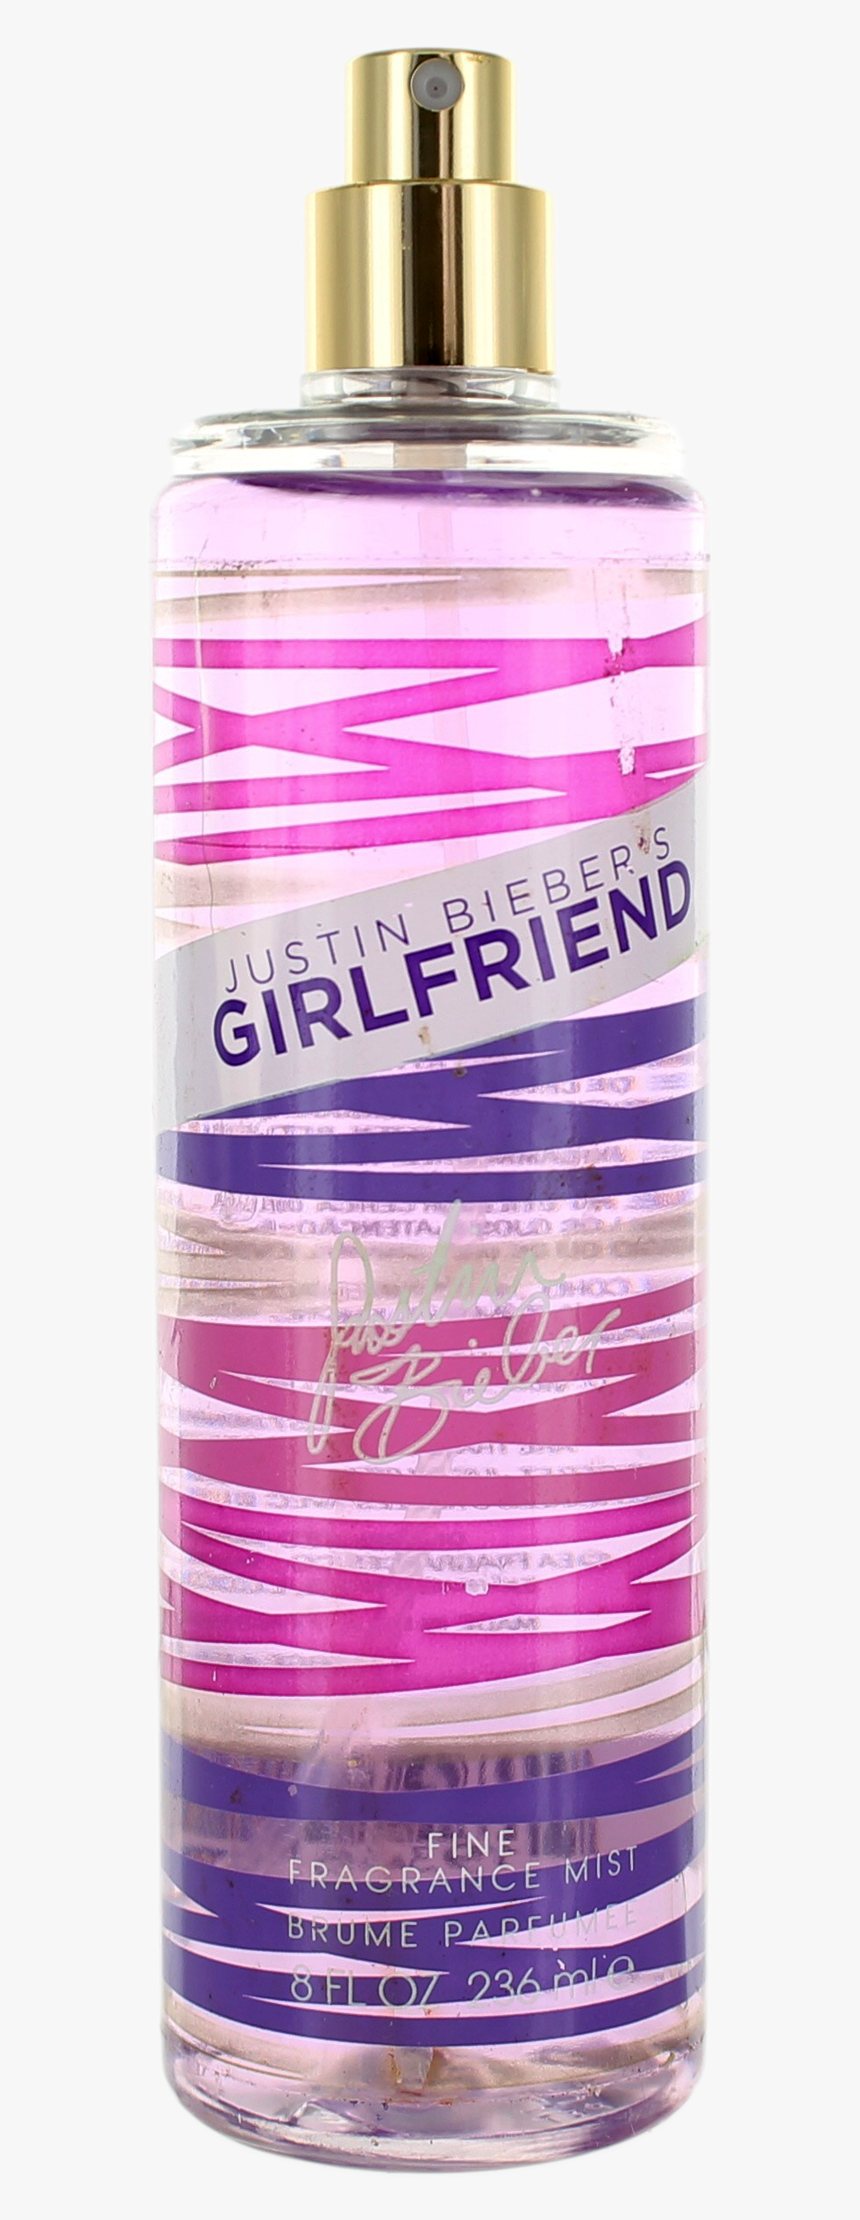 Girlfriend By Justin Bieber For Women Body Mist Perfume - Acrylic Paint, HD Png Download, Free Download